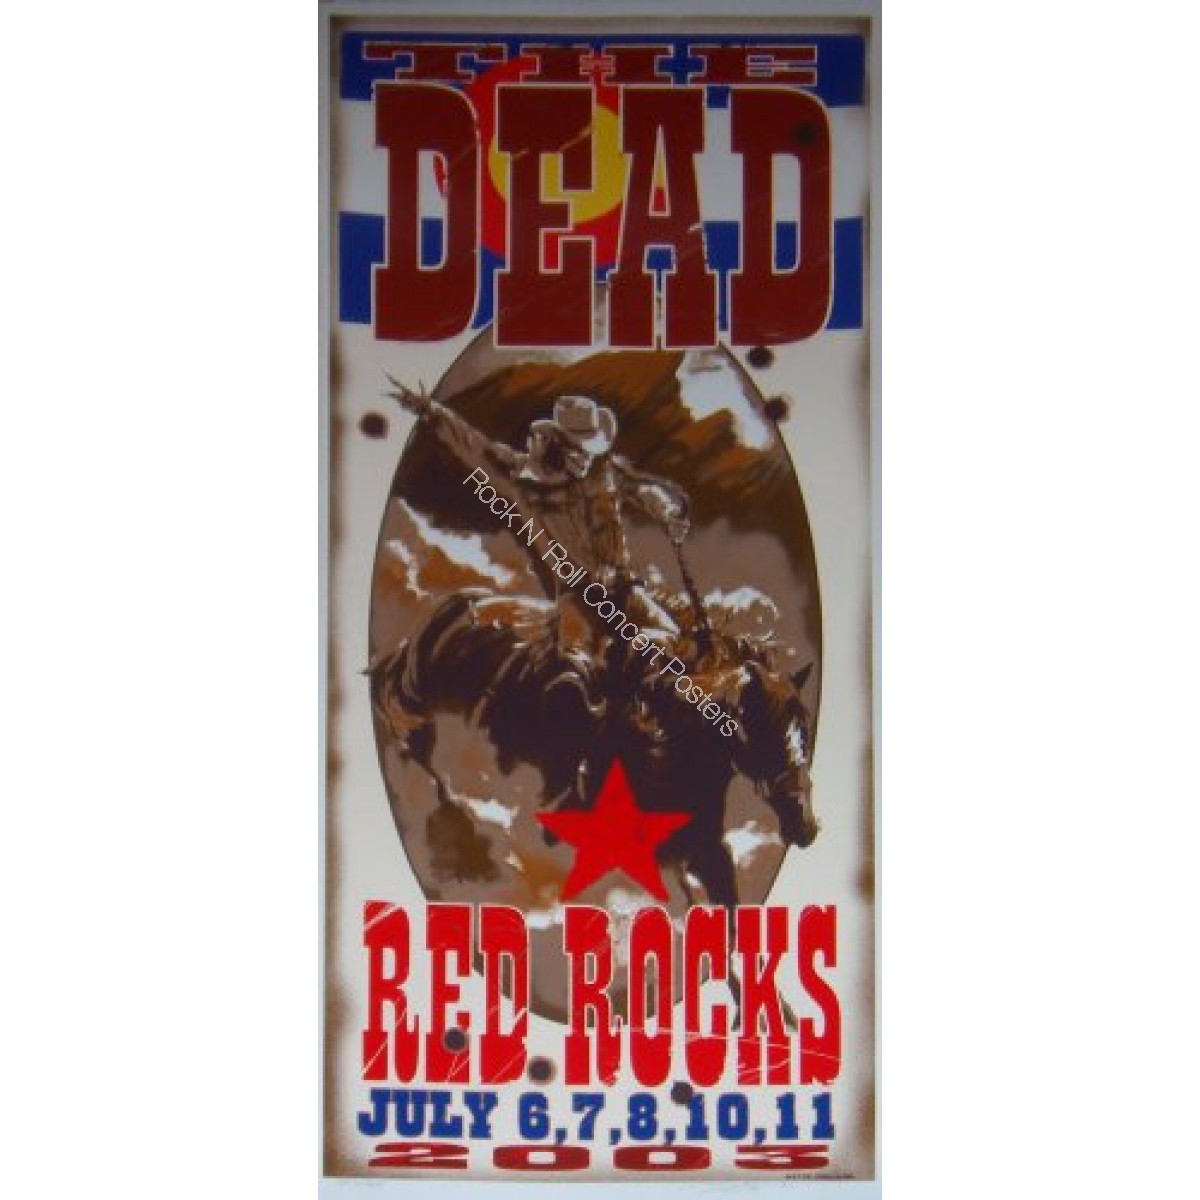 The Dead  @ Red Rocks 2003 Official Poster S/N